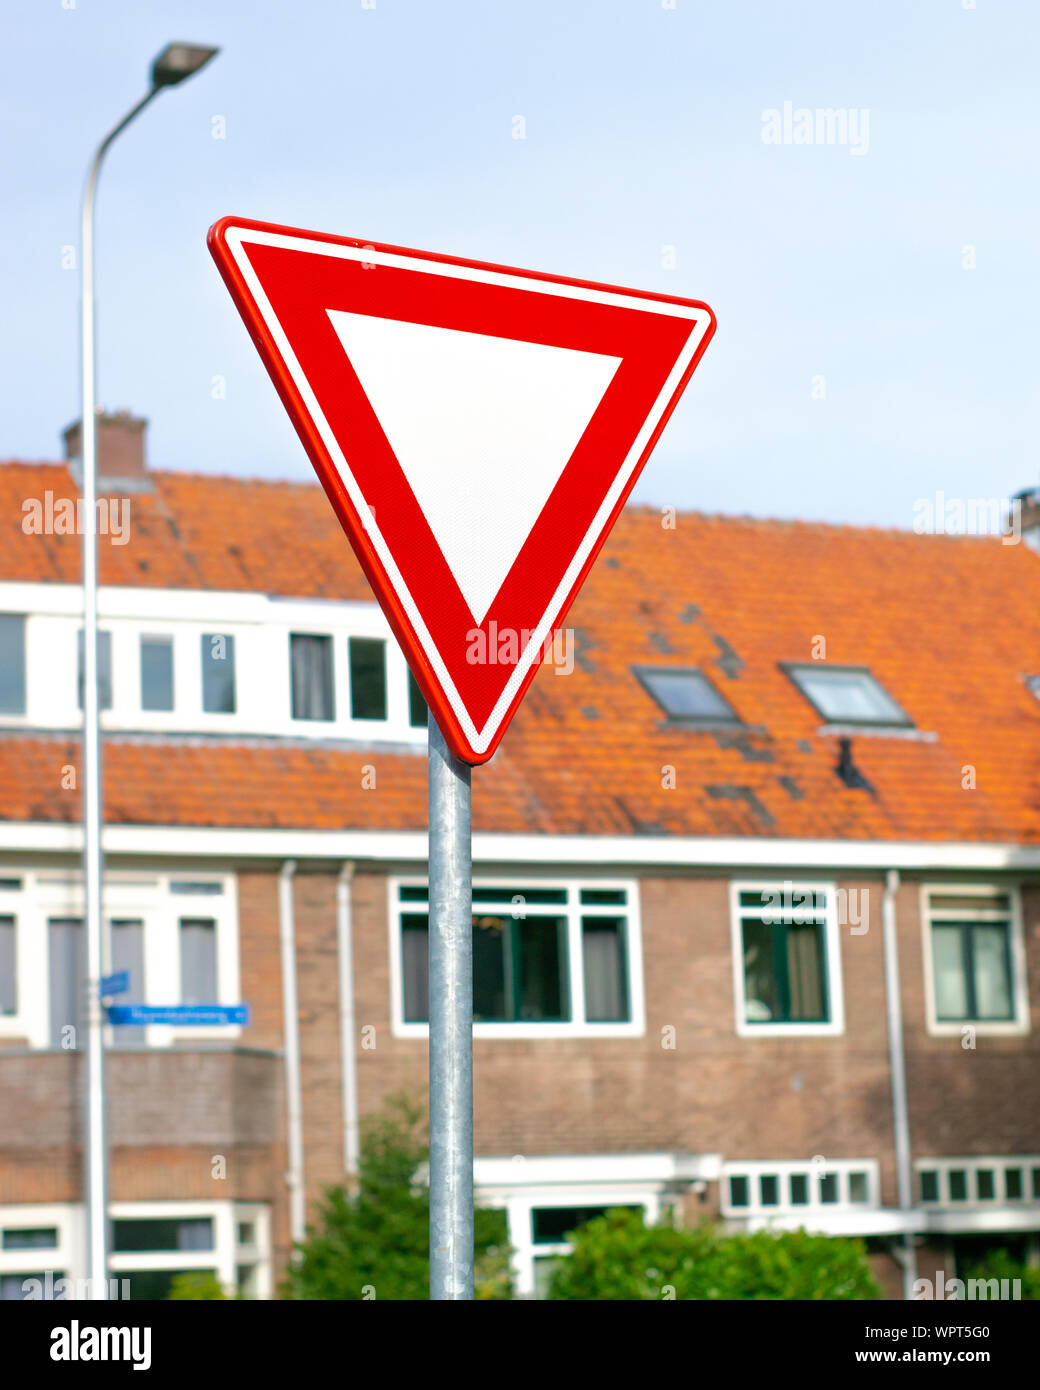 Dutch road sign: give priority to traffic on the main road ahead Stock Photo